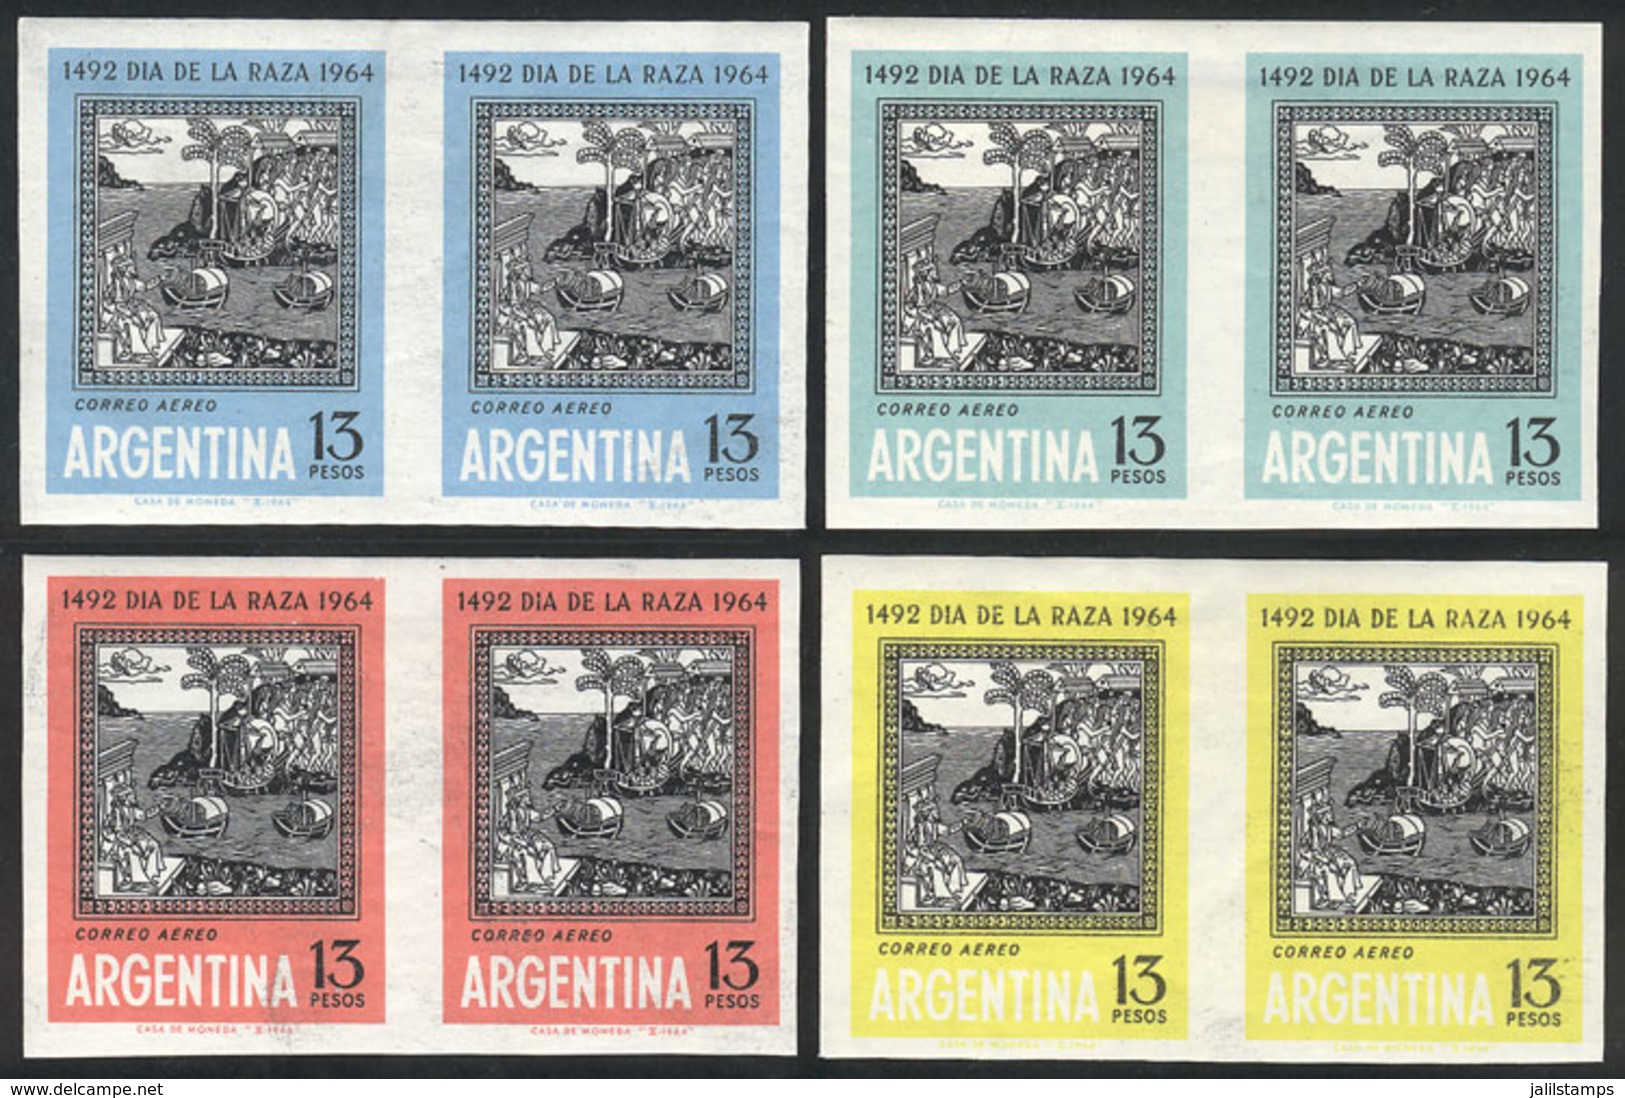 ARGENTINA: GJ.1287, 1964 Discovery Of America, TRIAL COLOR PROOFS, 4 Imperforate Pairs Printed On Gummed Paper With Wate - Luftpost